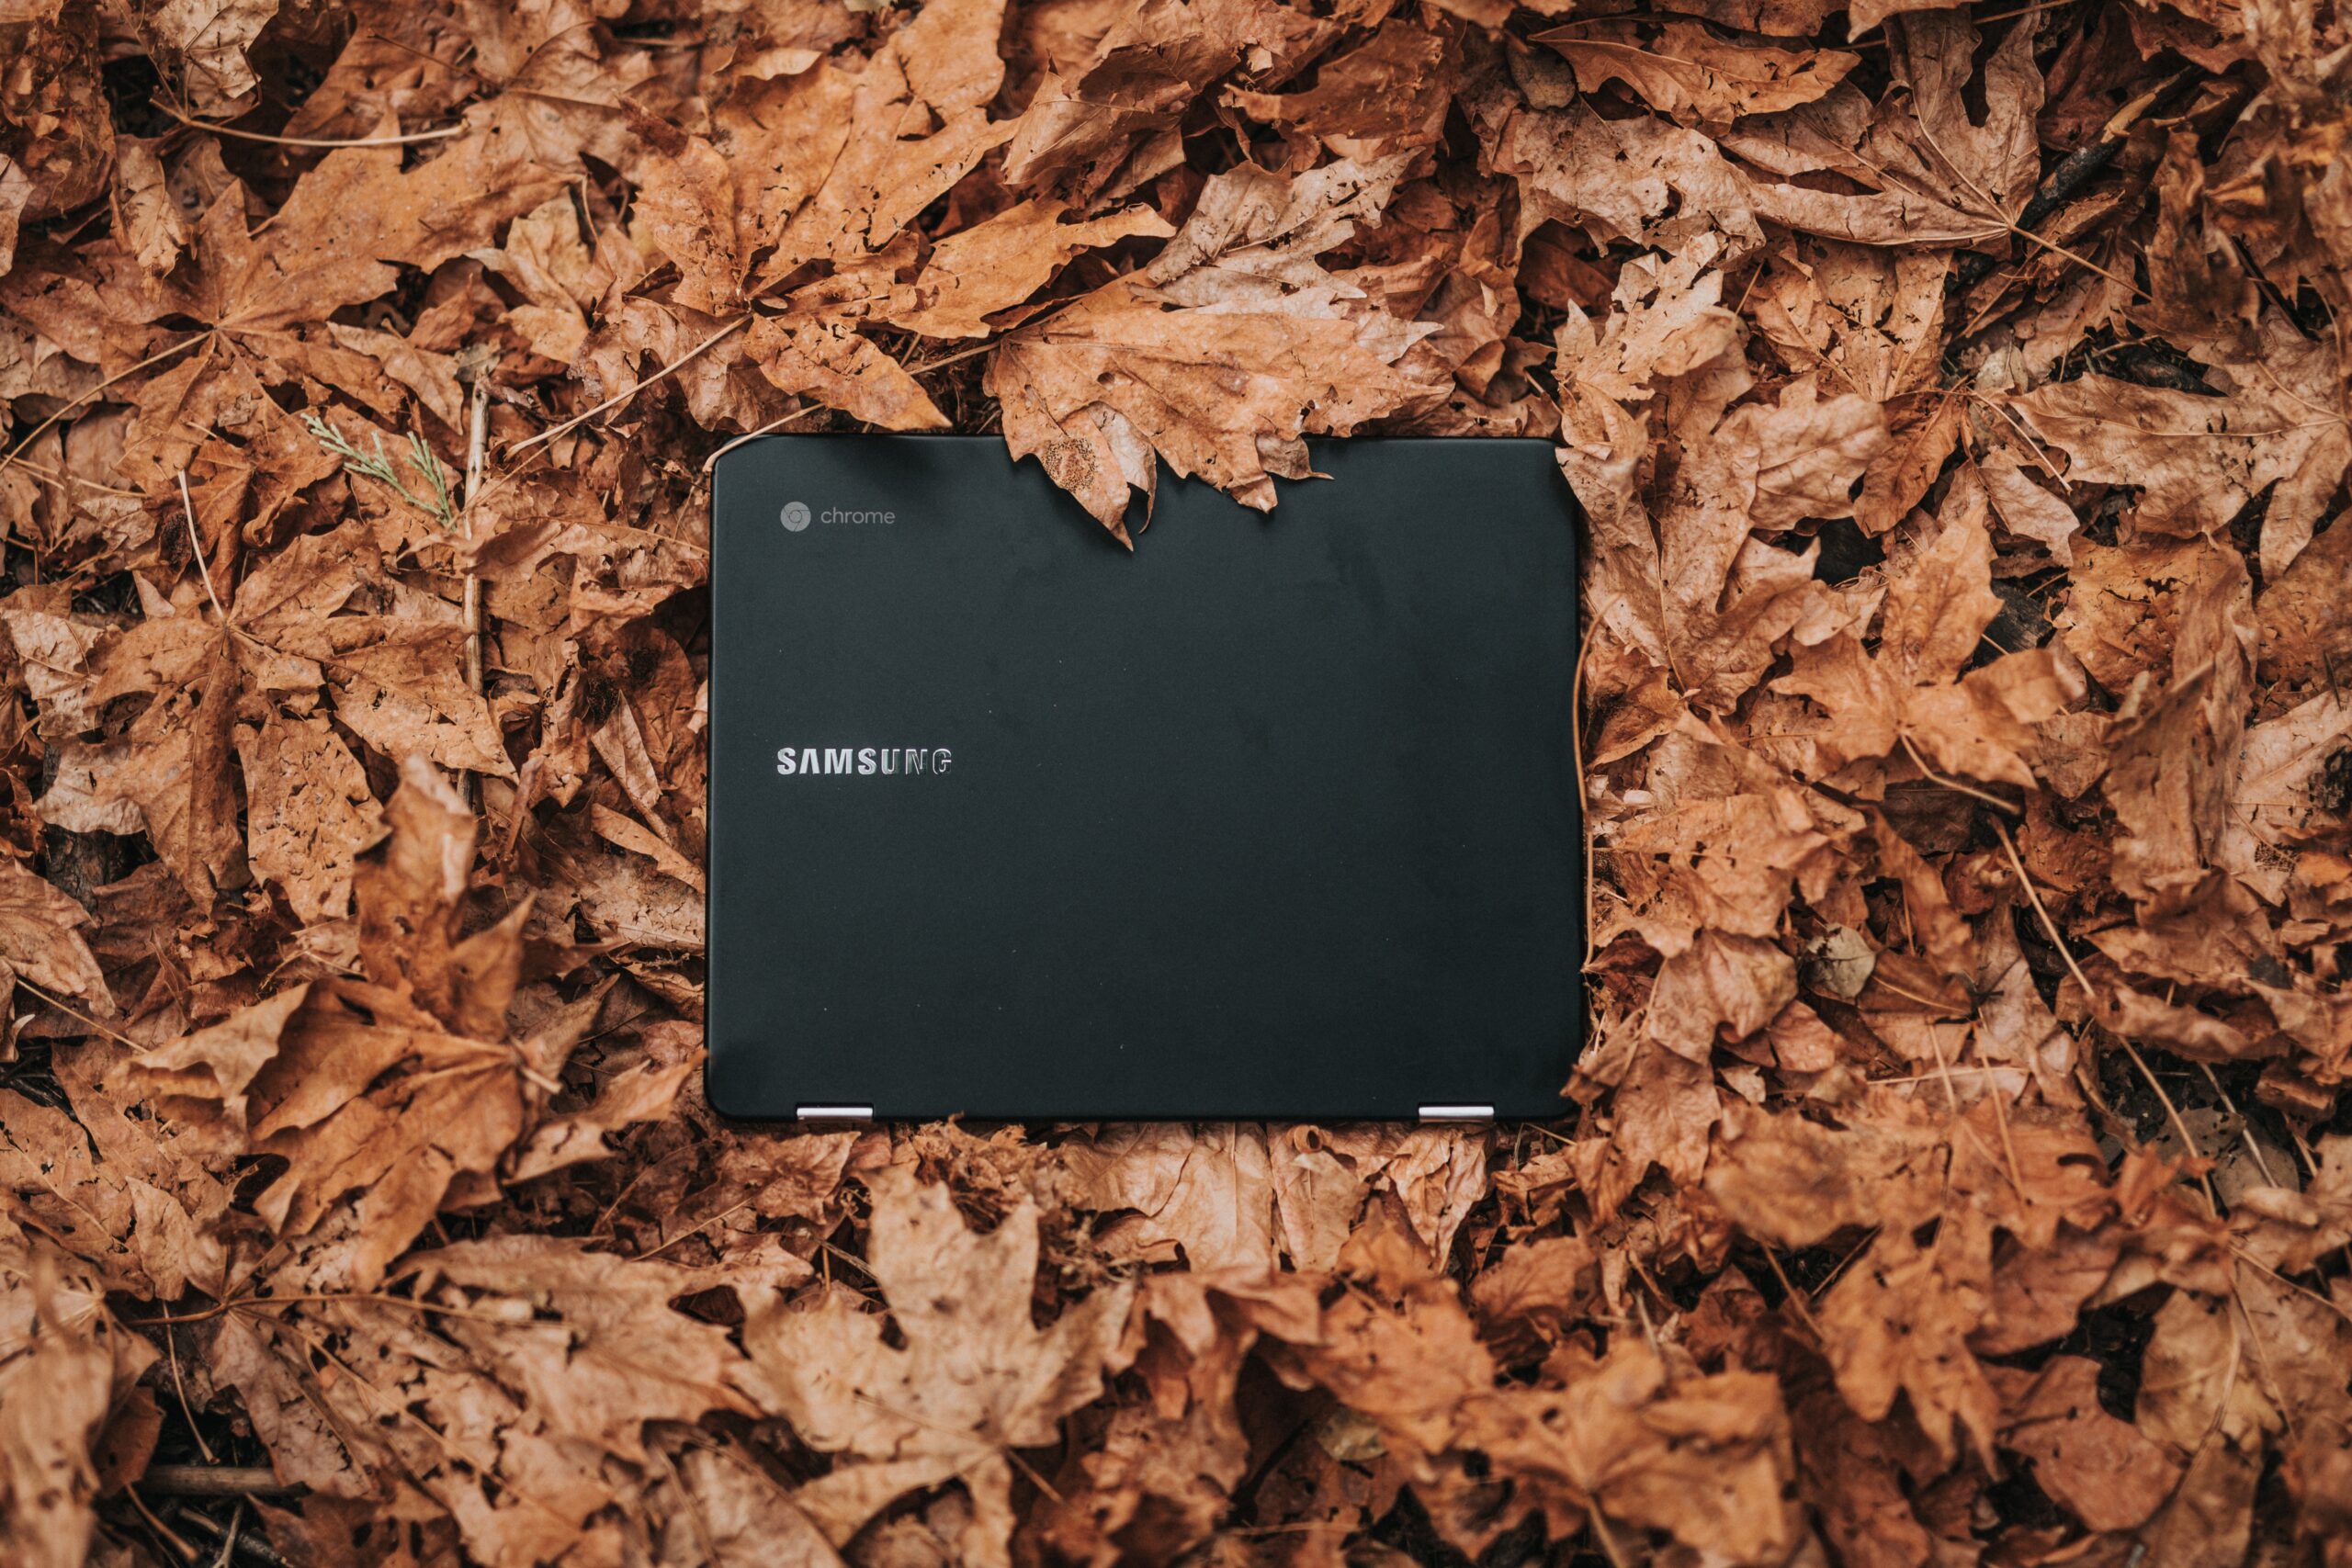 samsung laptop in fall leaves